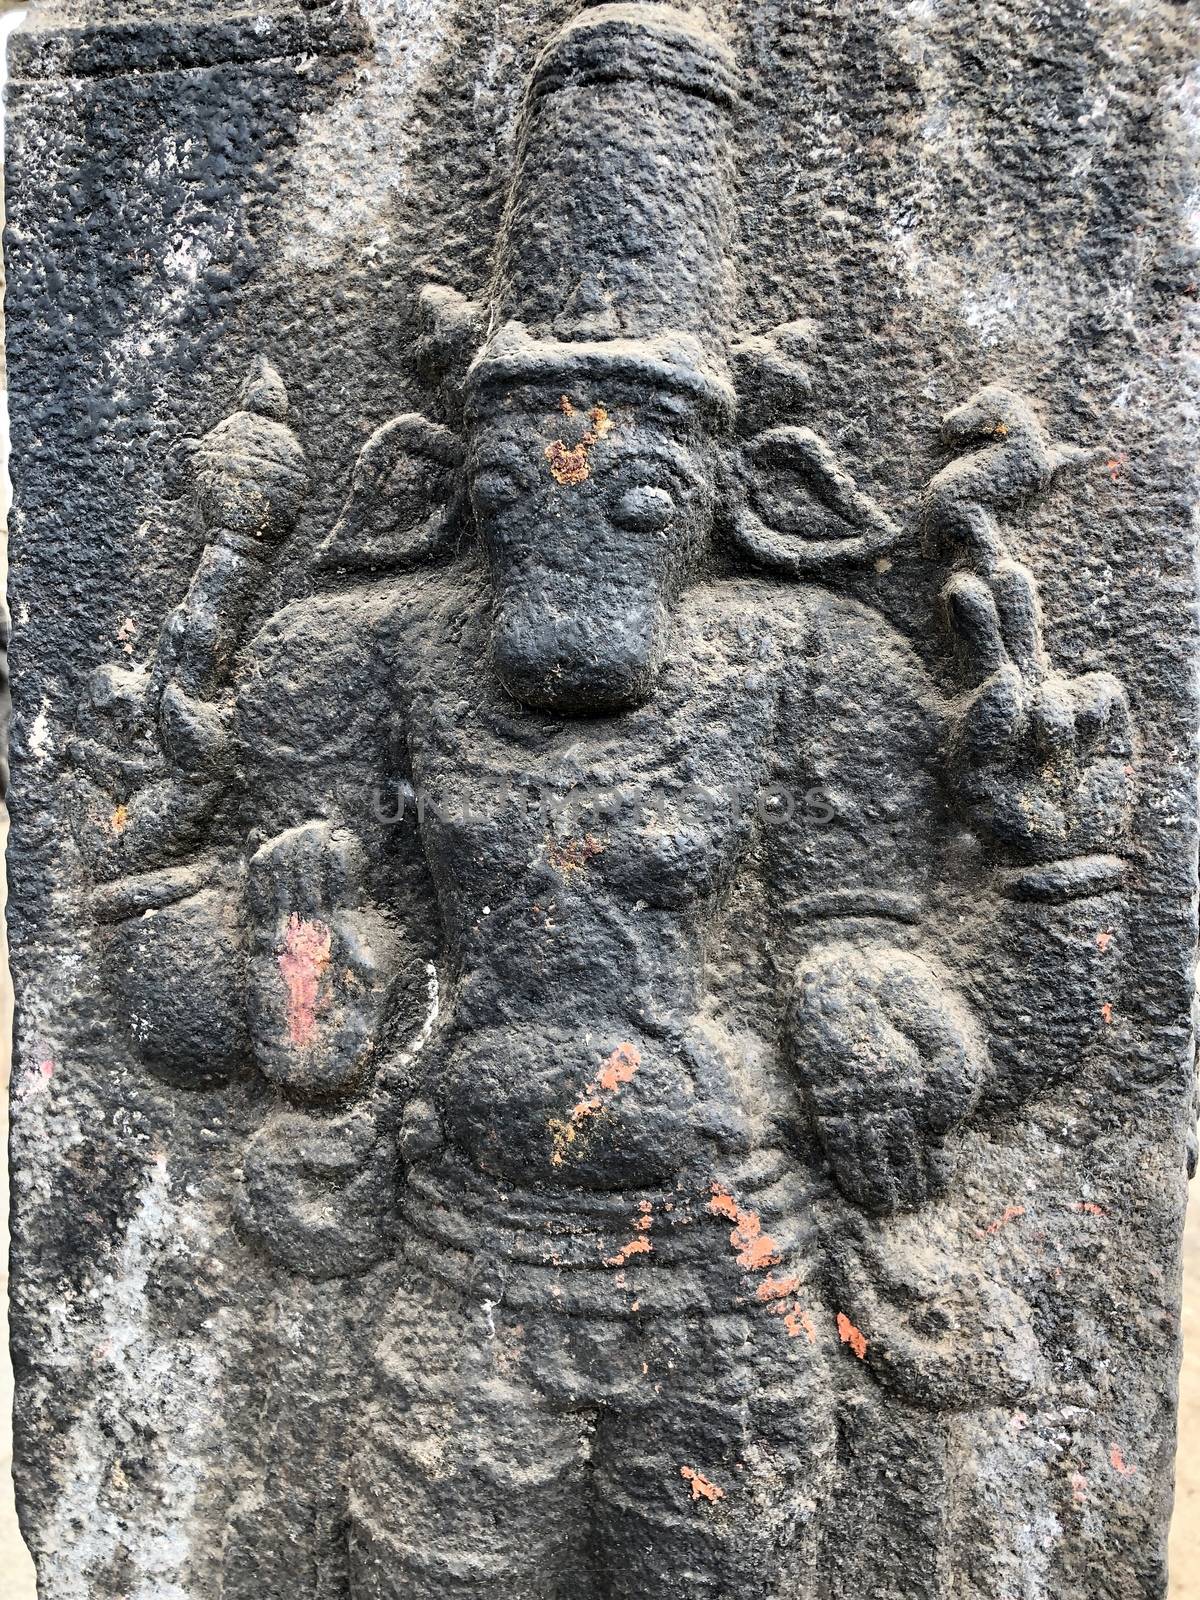 God with calf head sculpture. Bas relief sculpture carved in the stone walls at Shiva temple in Tamil nadu by prabhakaran851